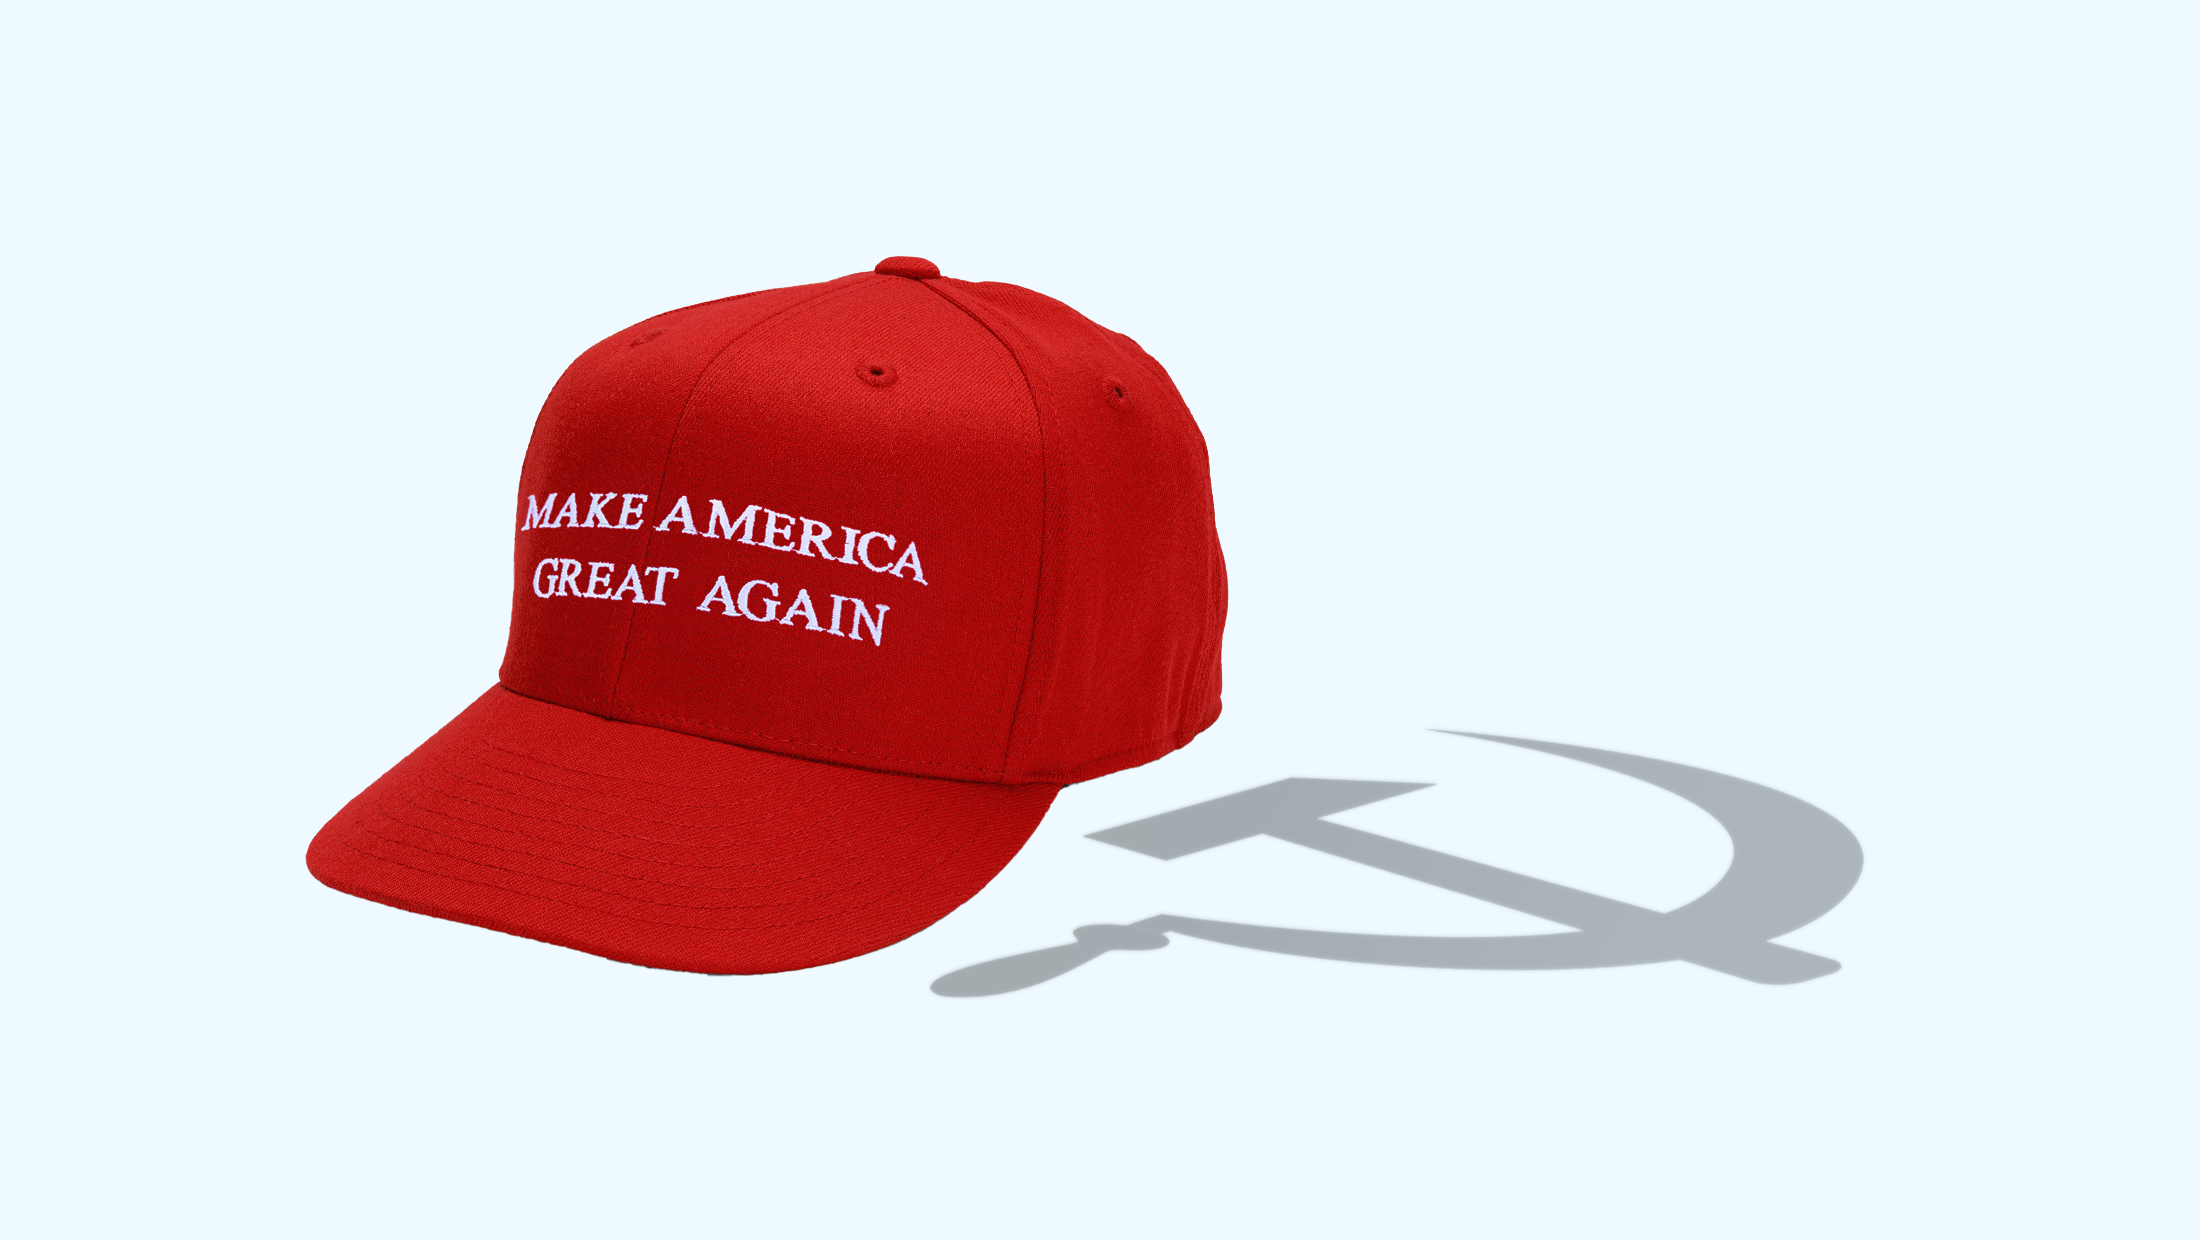 A red "MAKE AMERICA GREAT AGAIN" hat that is casting a shadow shaped like a communist hammer and sickle